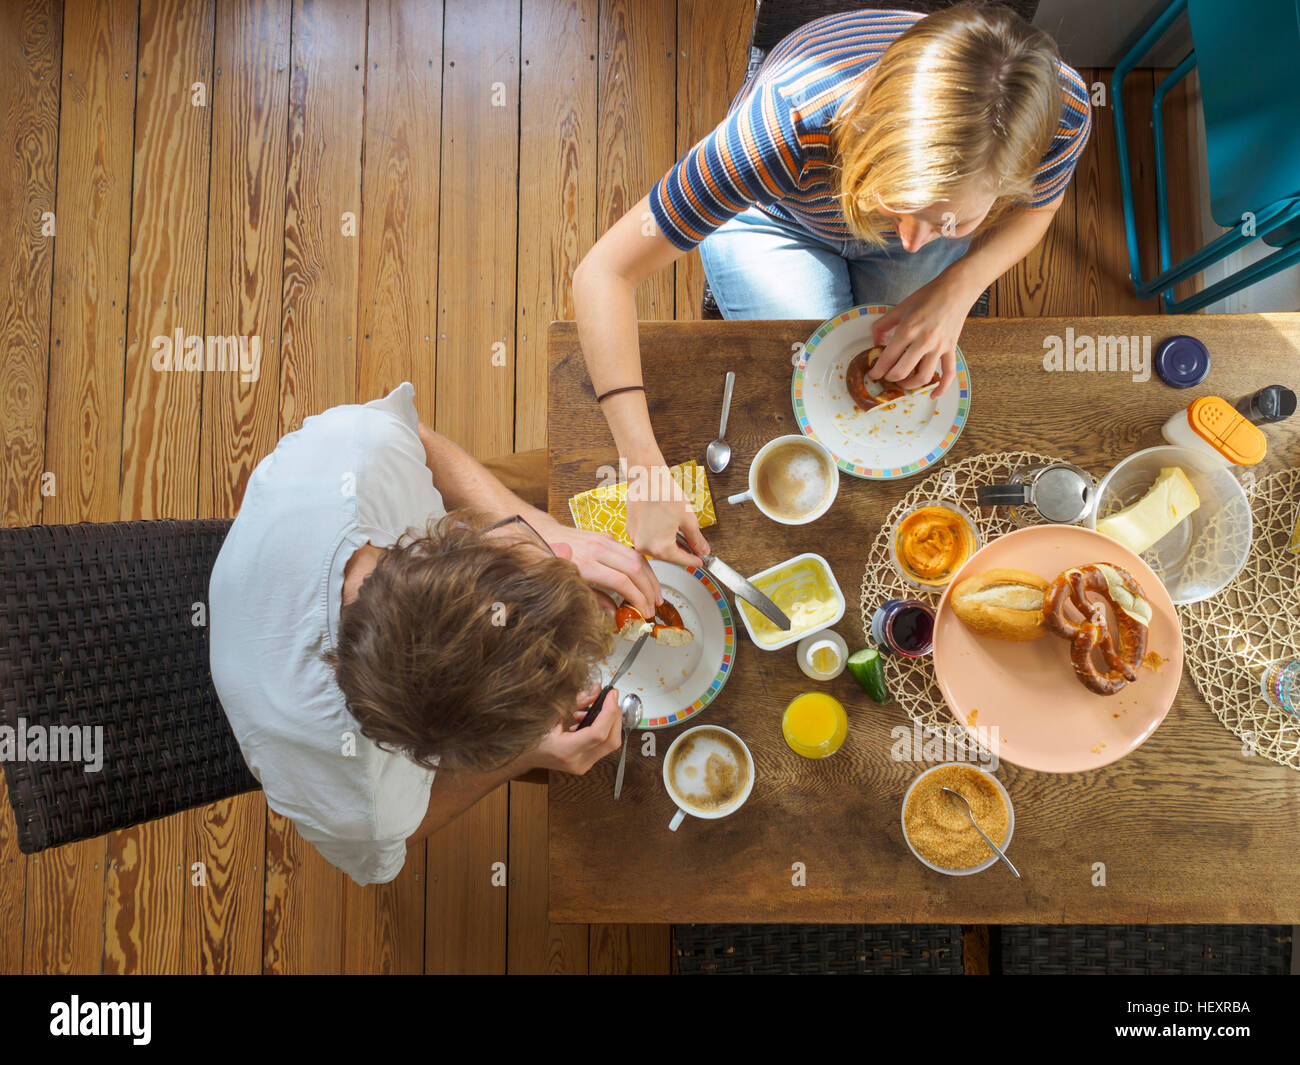 Young couple sitting at table, having breakfast, overhead view Stock Photo